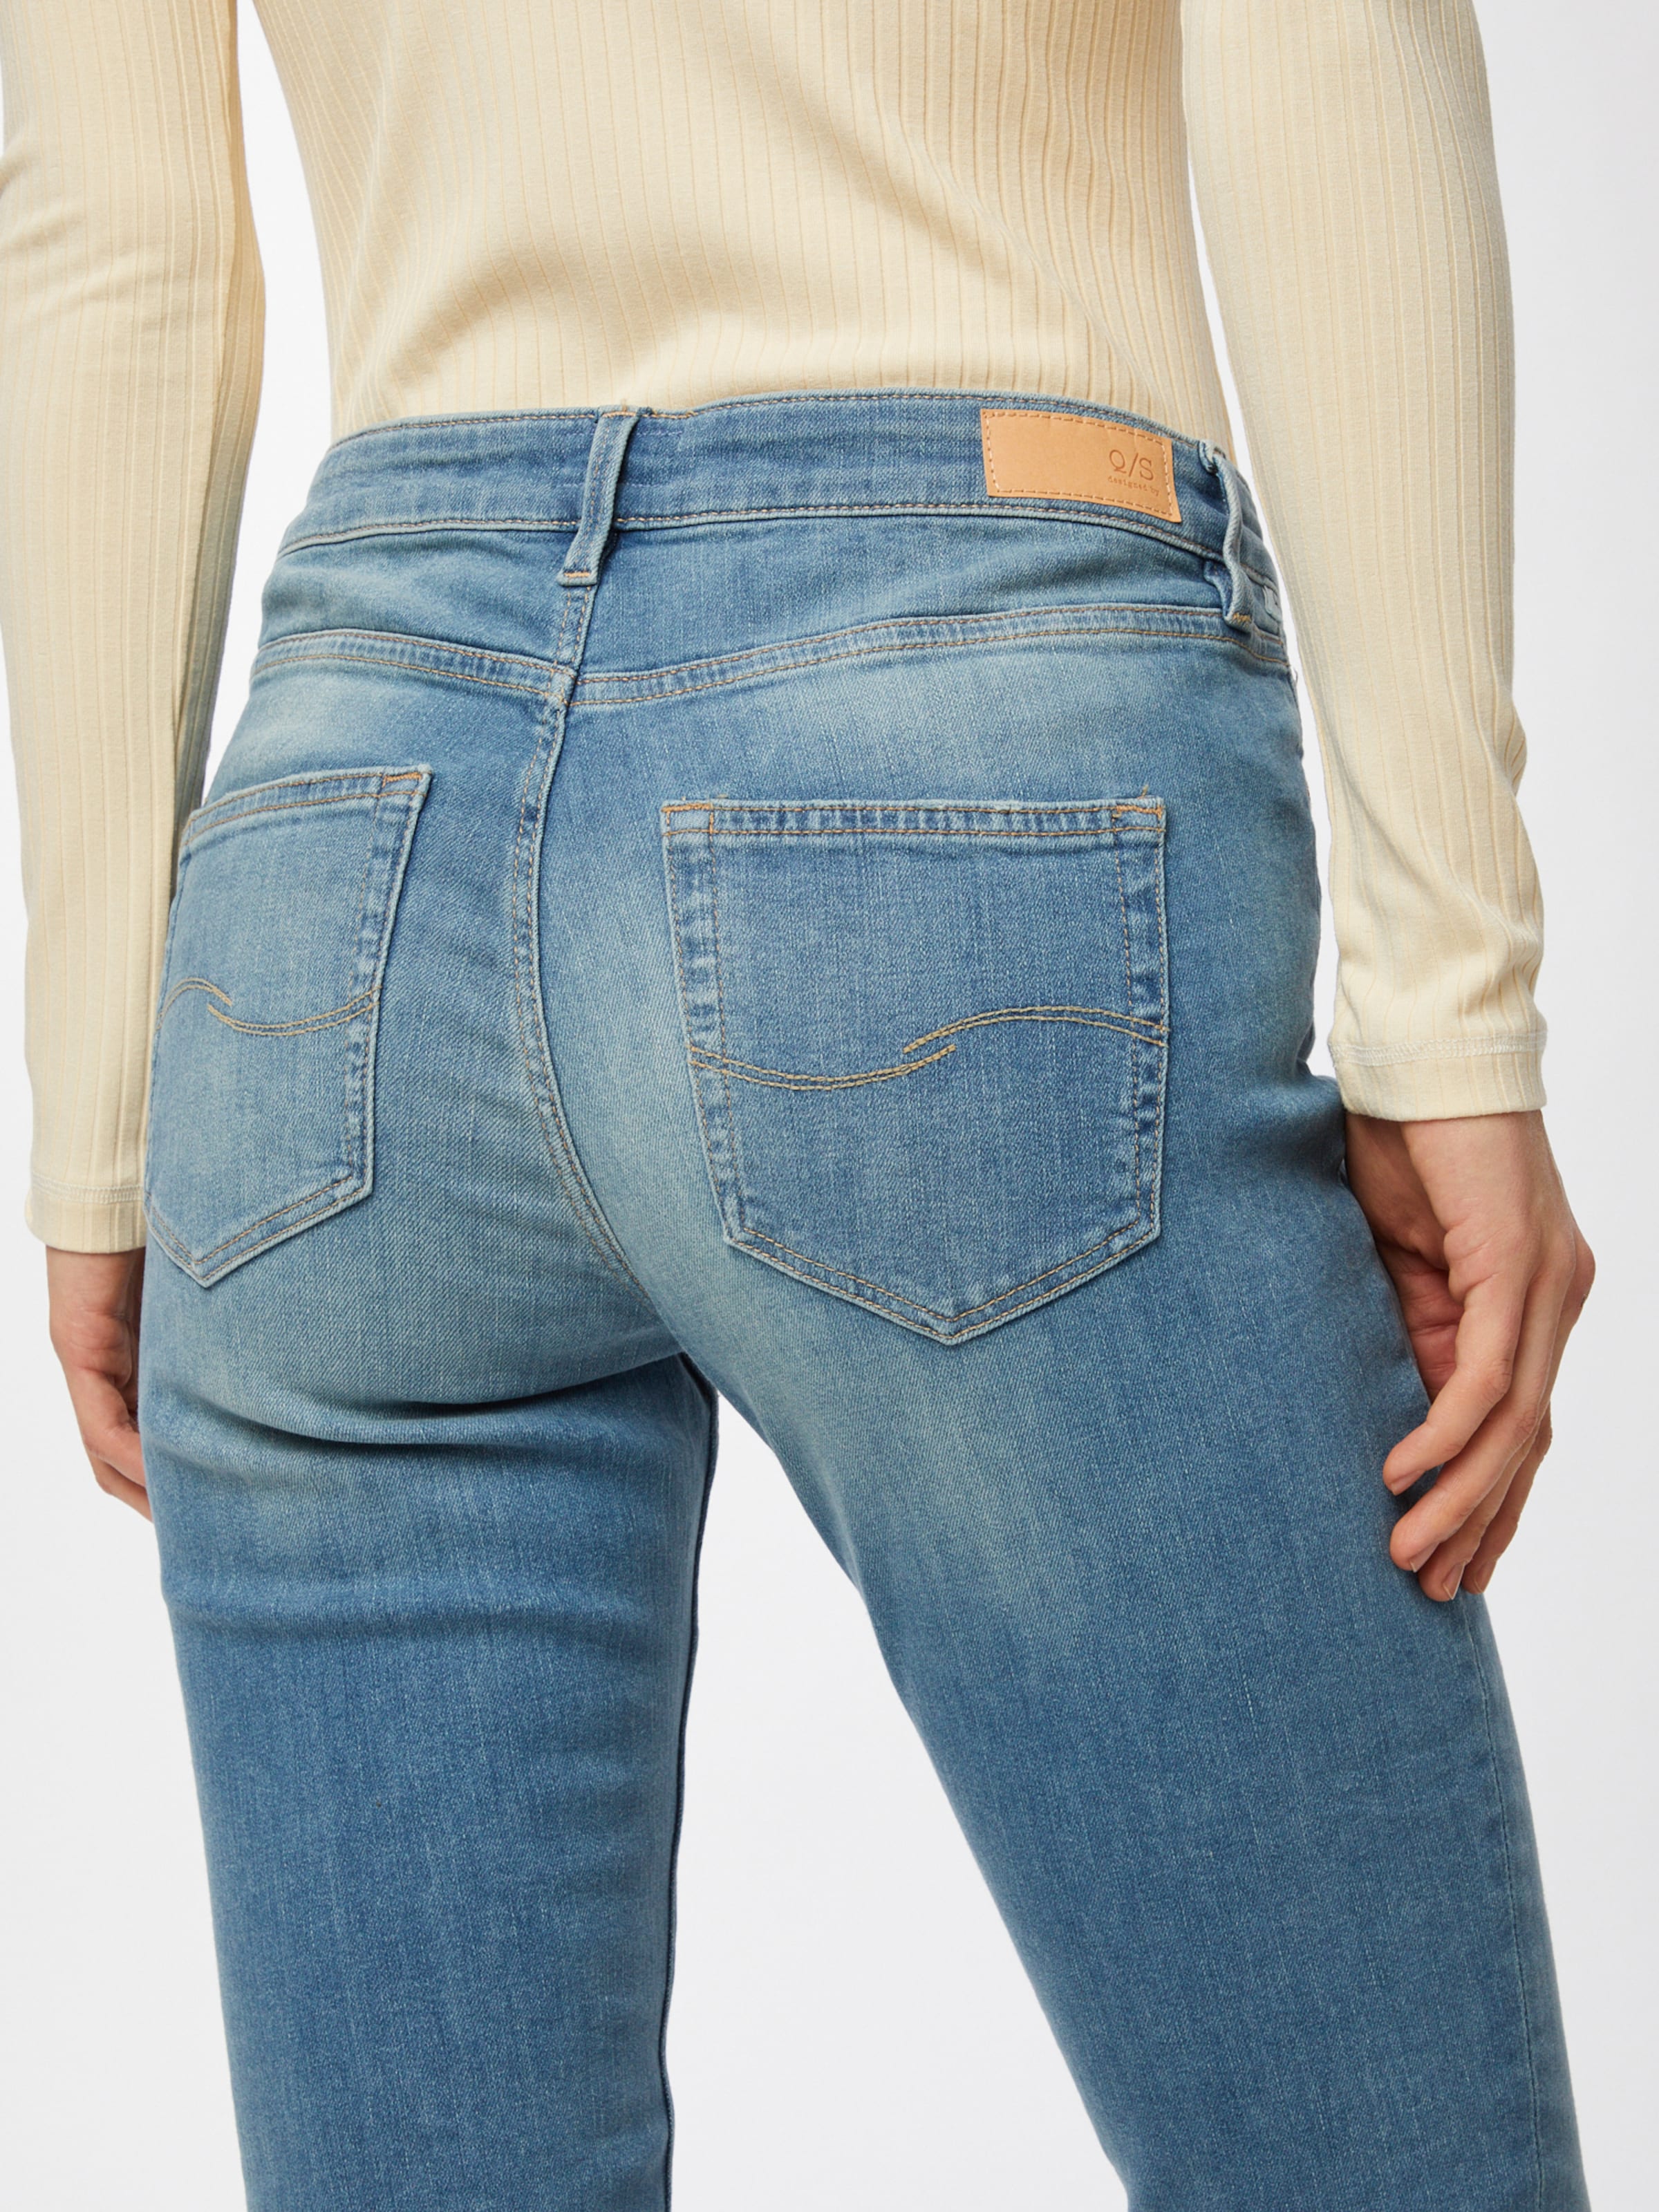 Q/S by s.Oliver Jeans in Hellblau 